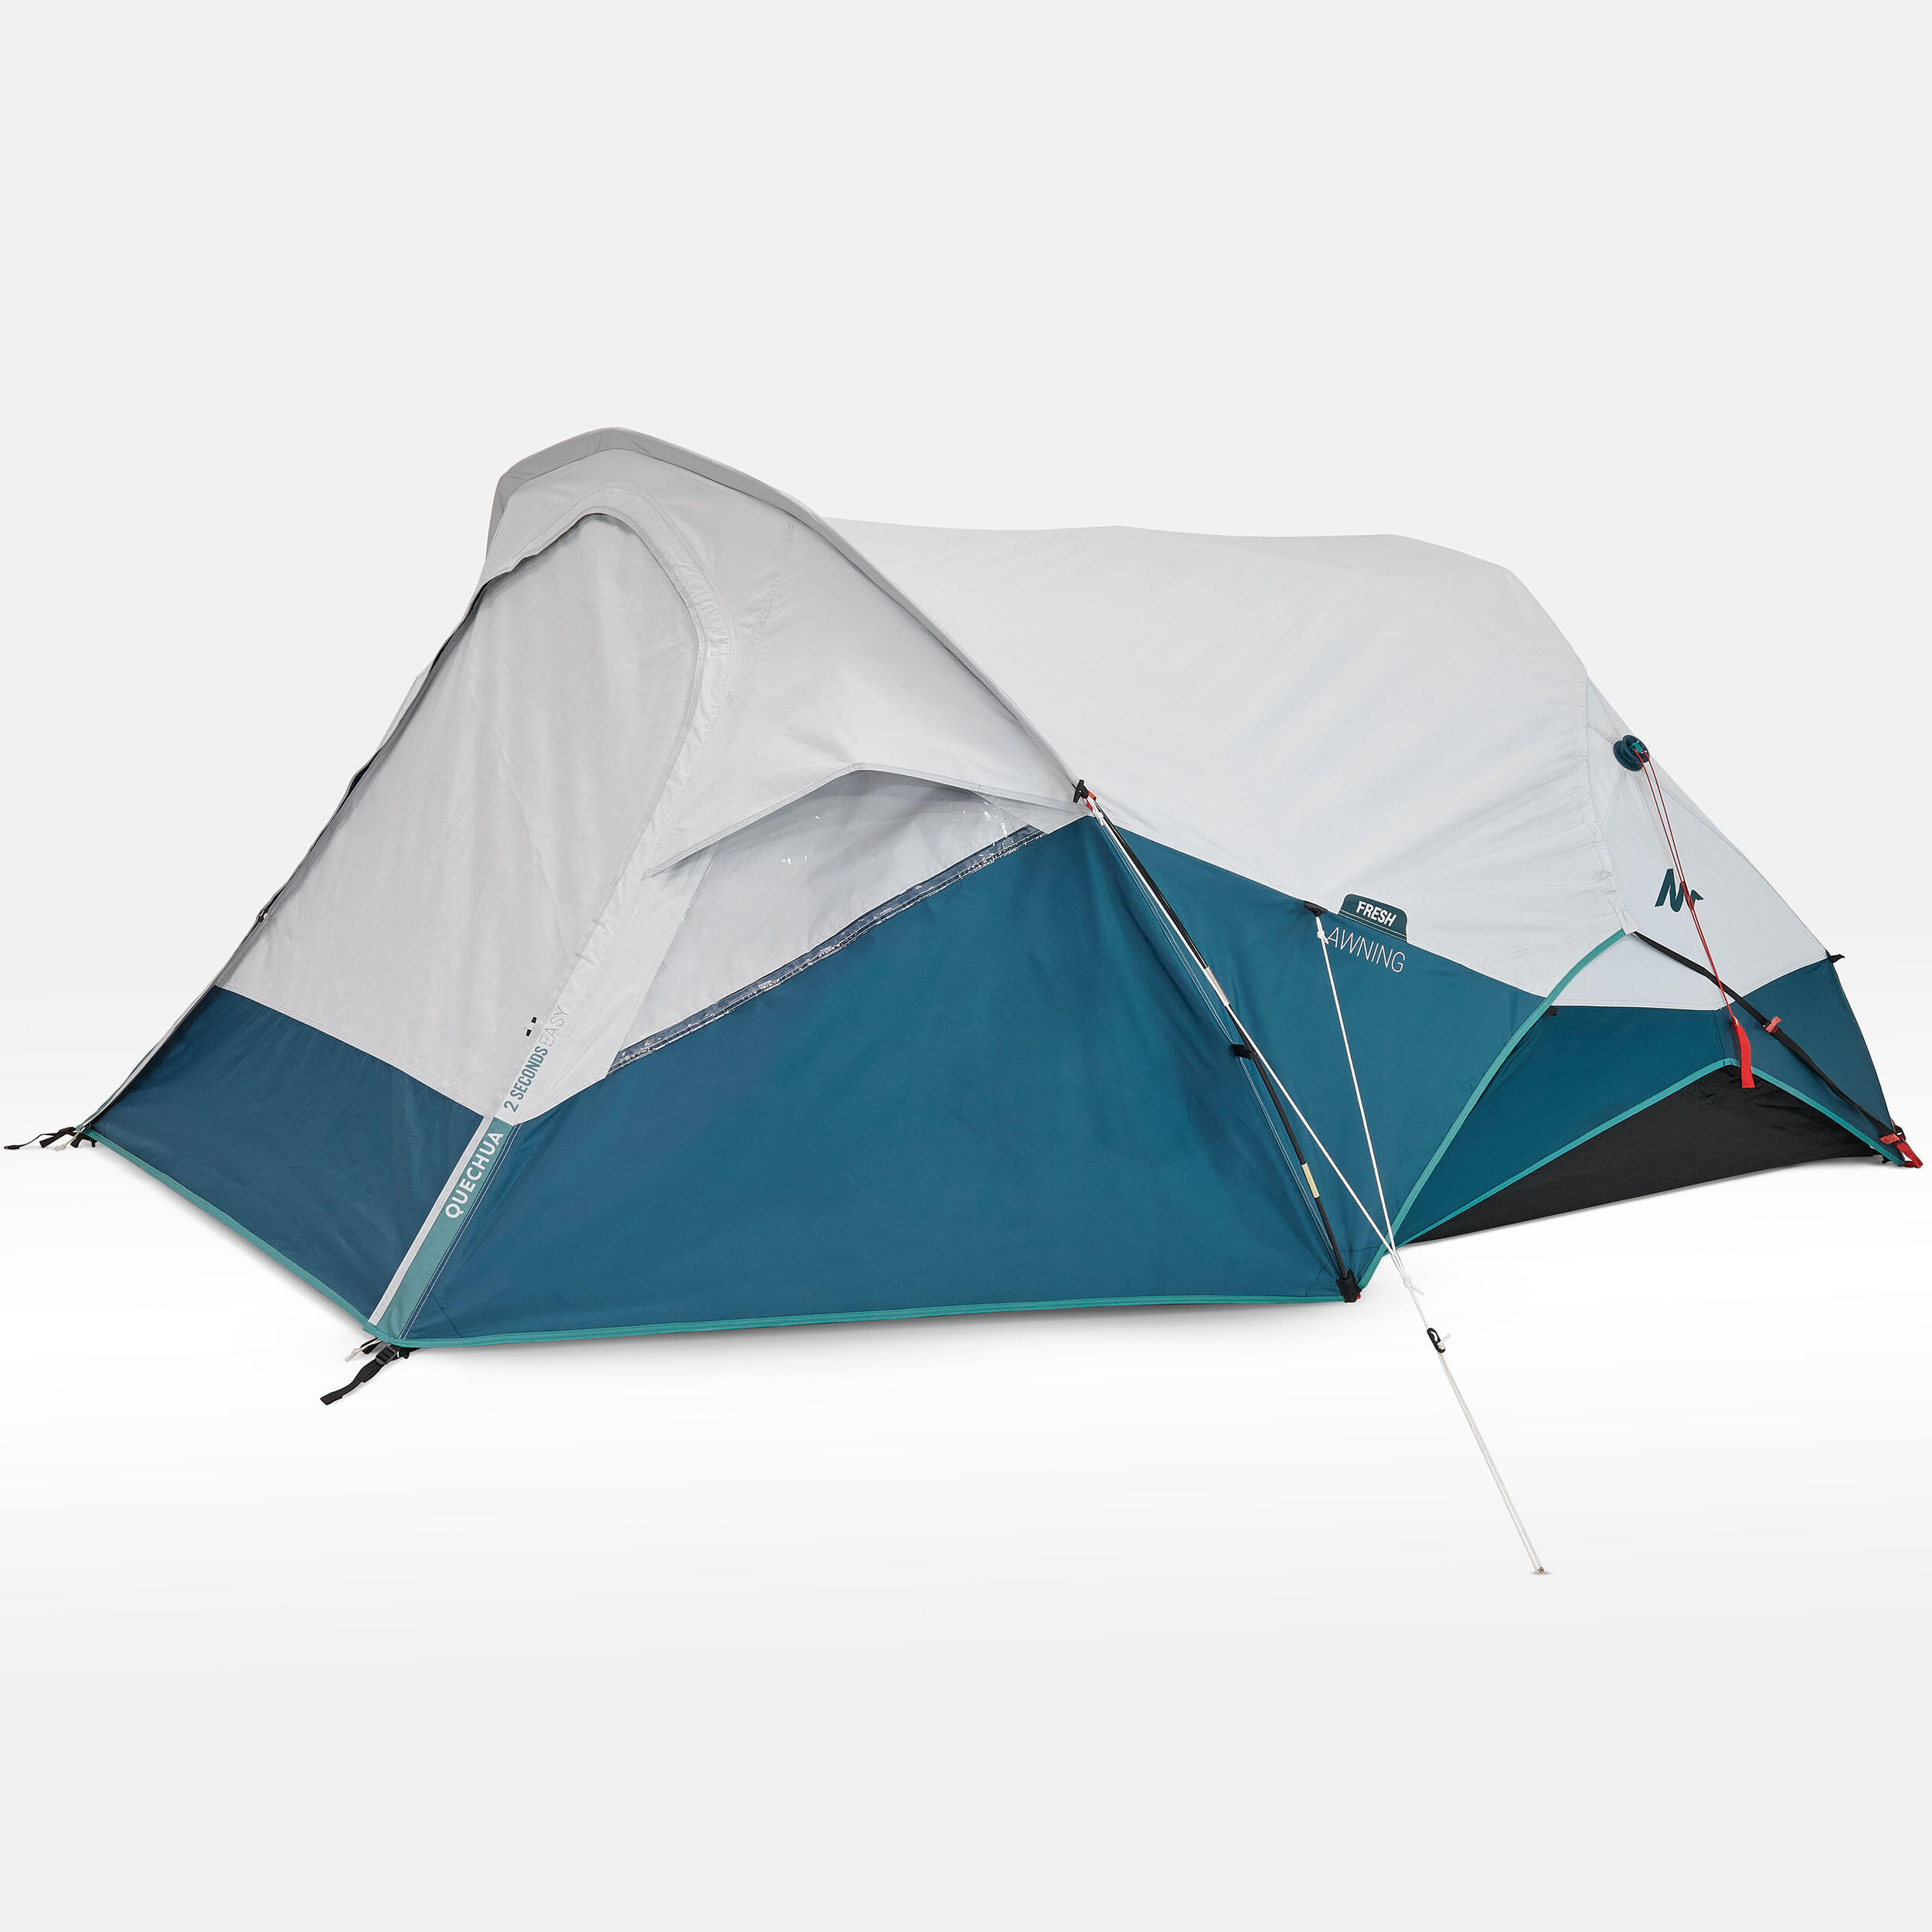 Camping awning - 2 Seconds EASY - Fresh 20/20